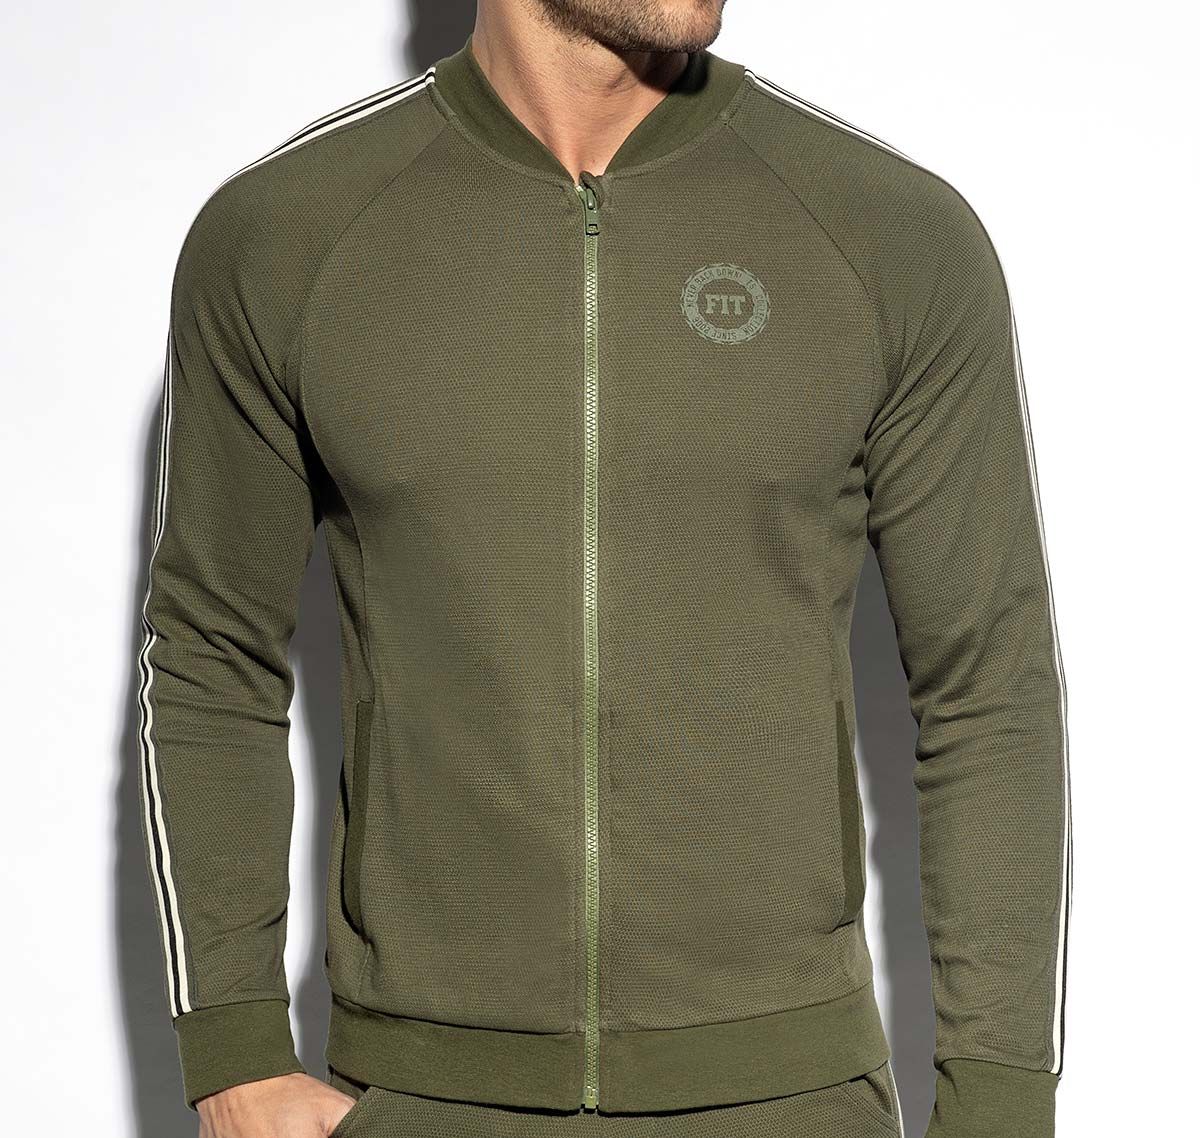 ES Collection Chaqueta deportiva FIT TAPE JACKET SP208, verde